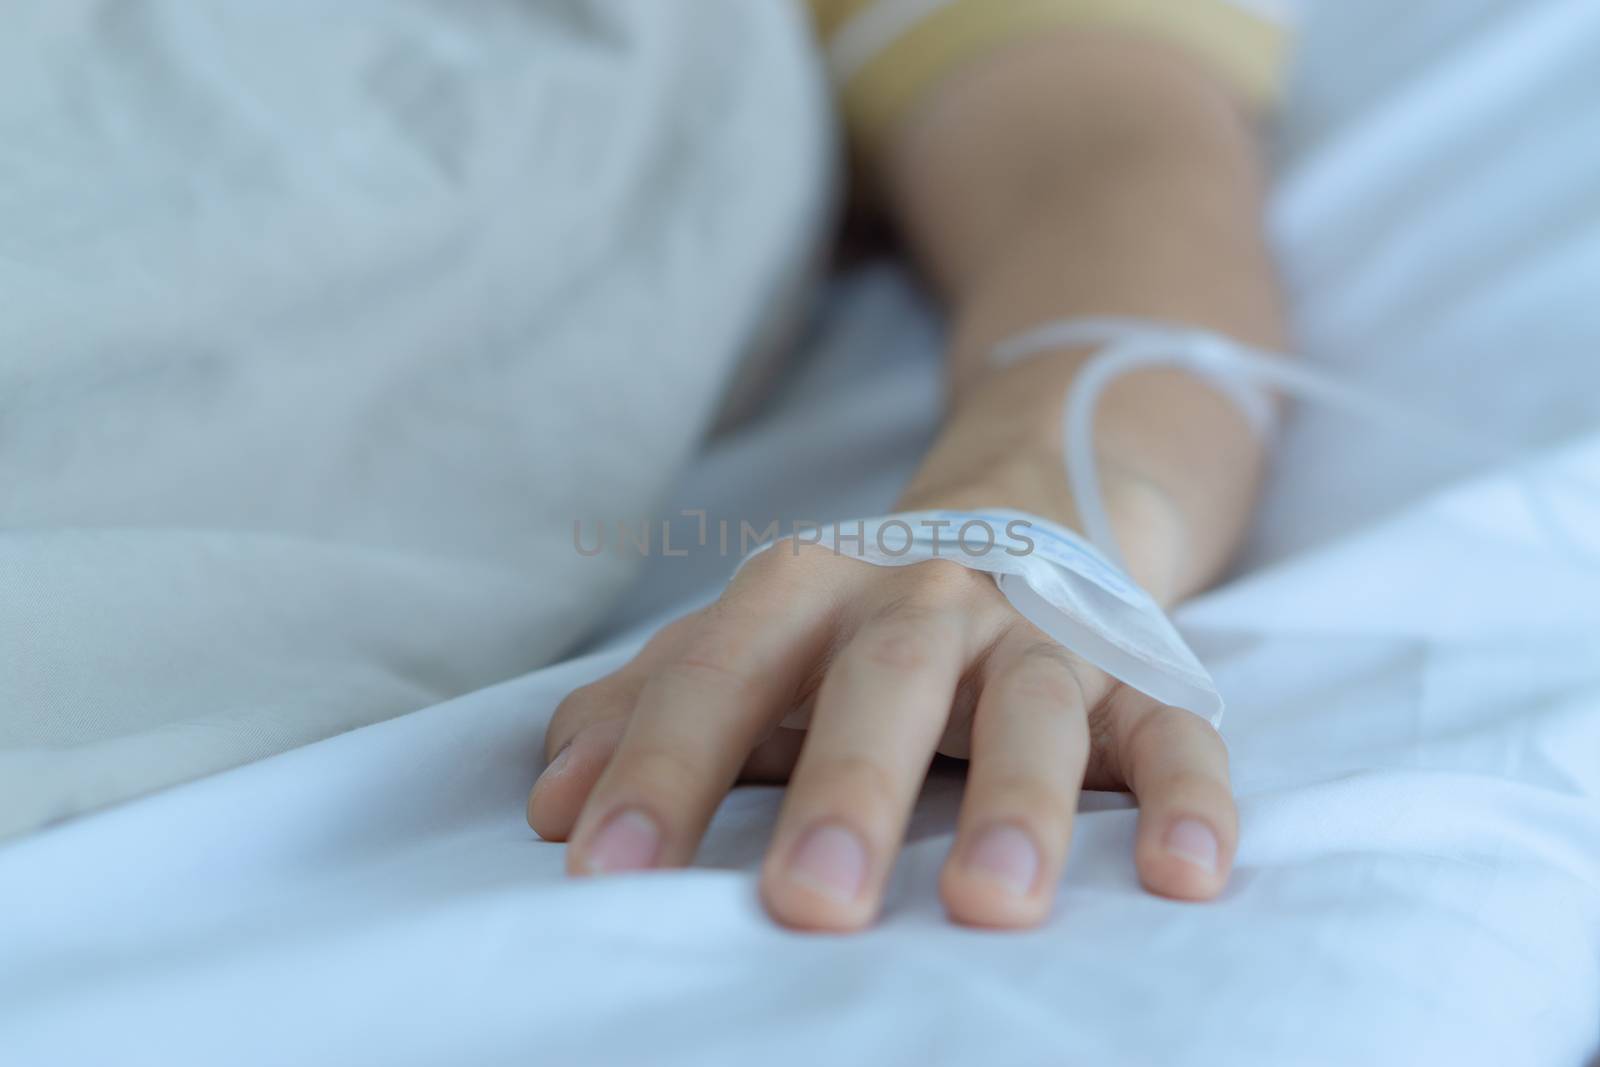 Patient hand with the tube of normal saline infusion on with cloth background at the hospital. Sick and health concept